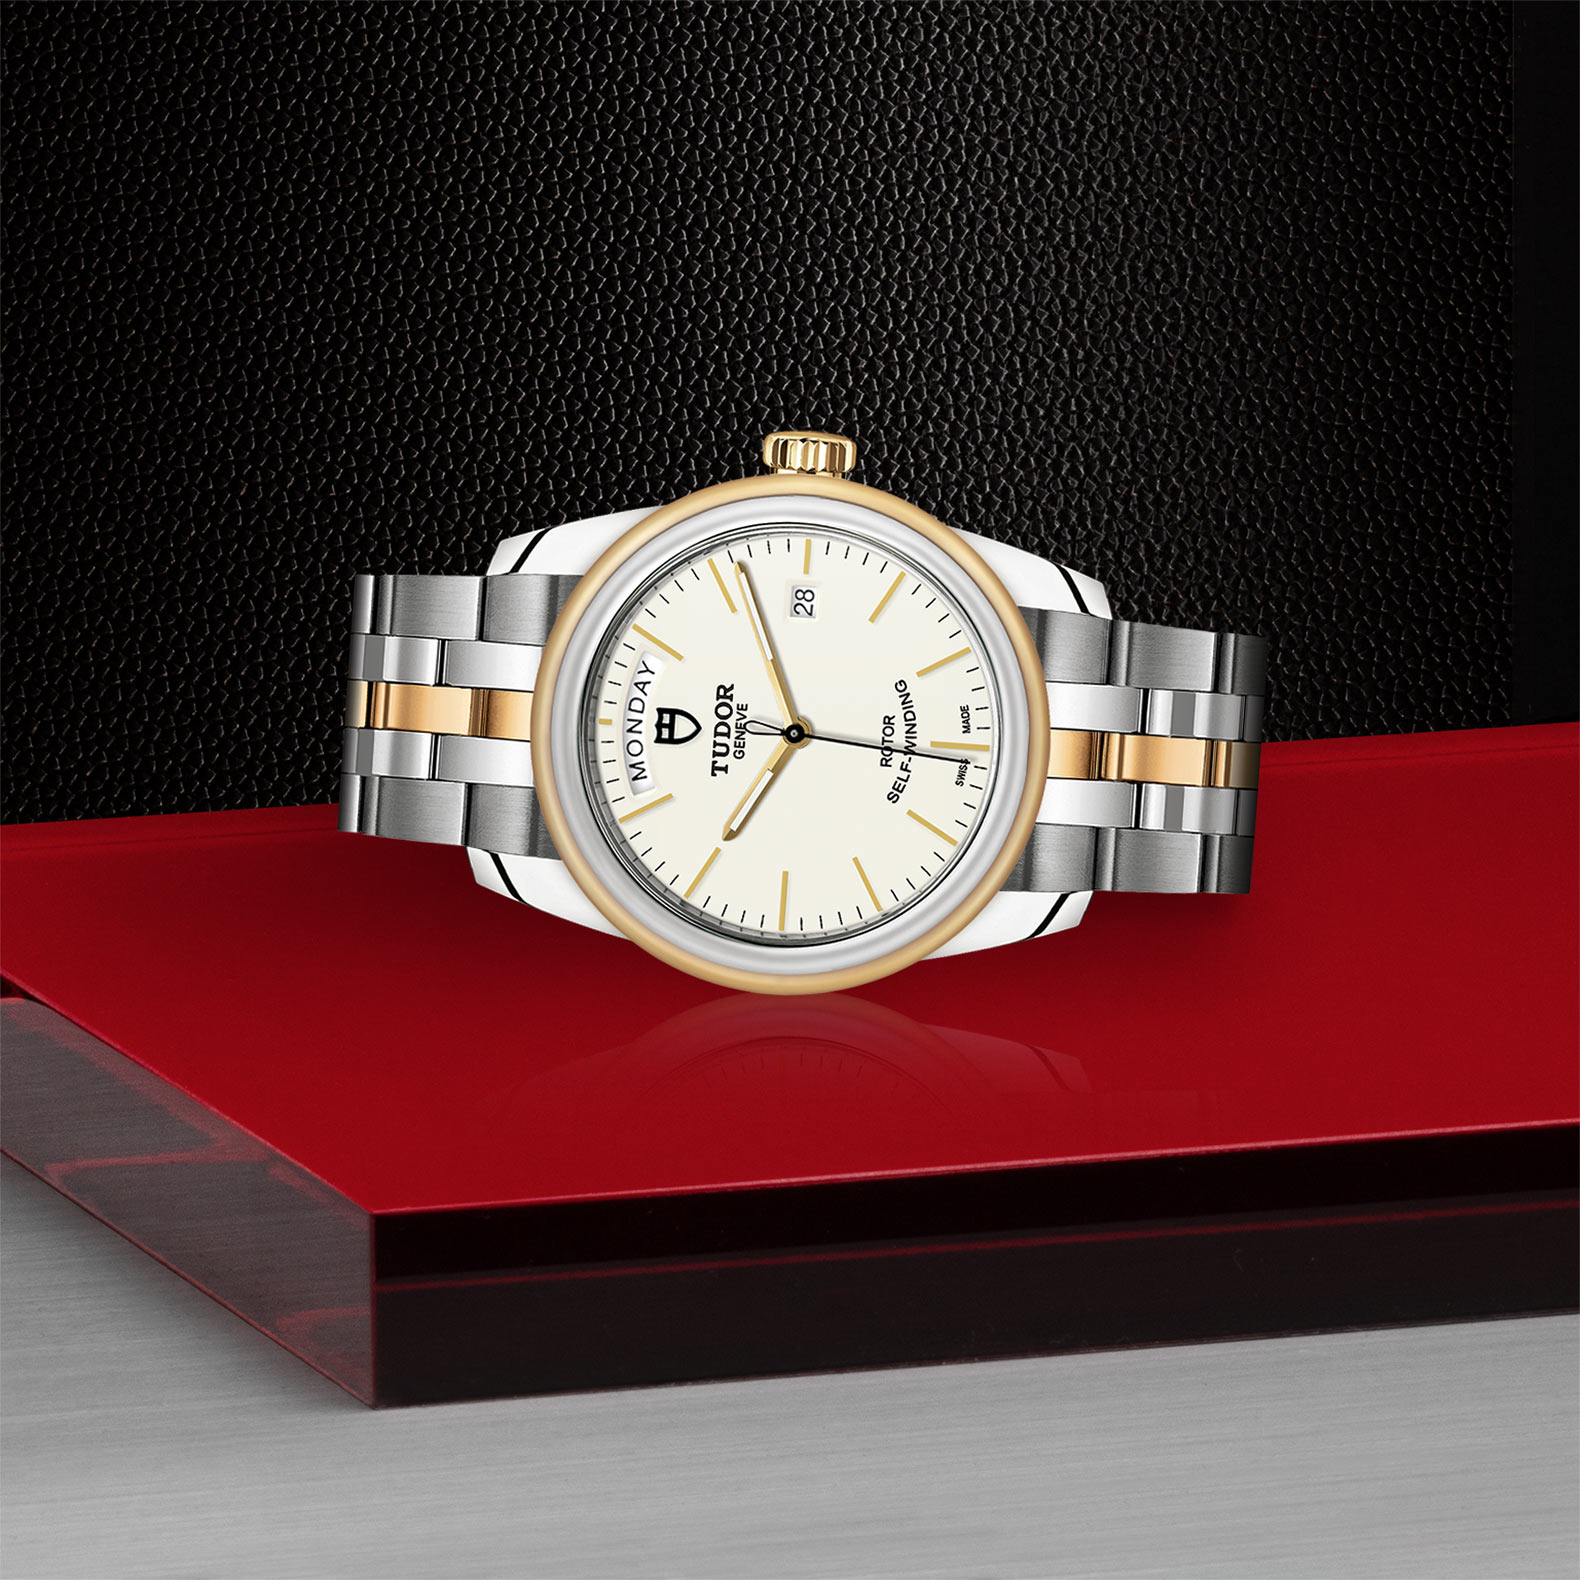 Tudor Glamour Date+Day M56003-0112